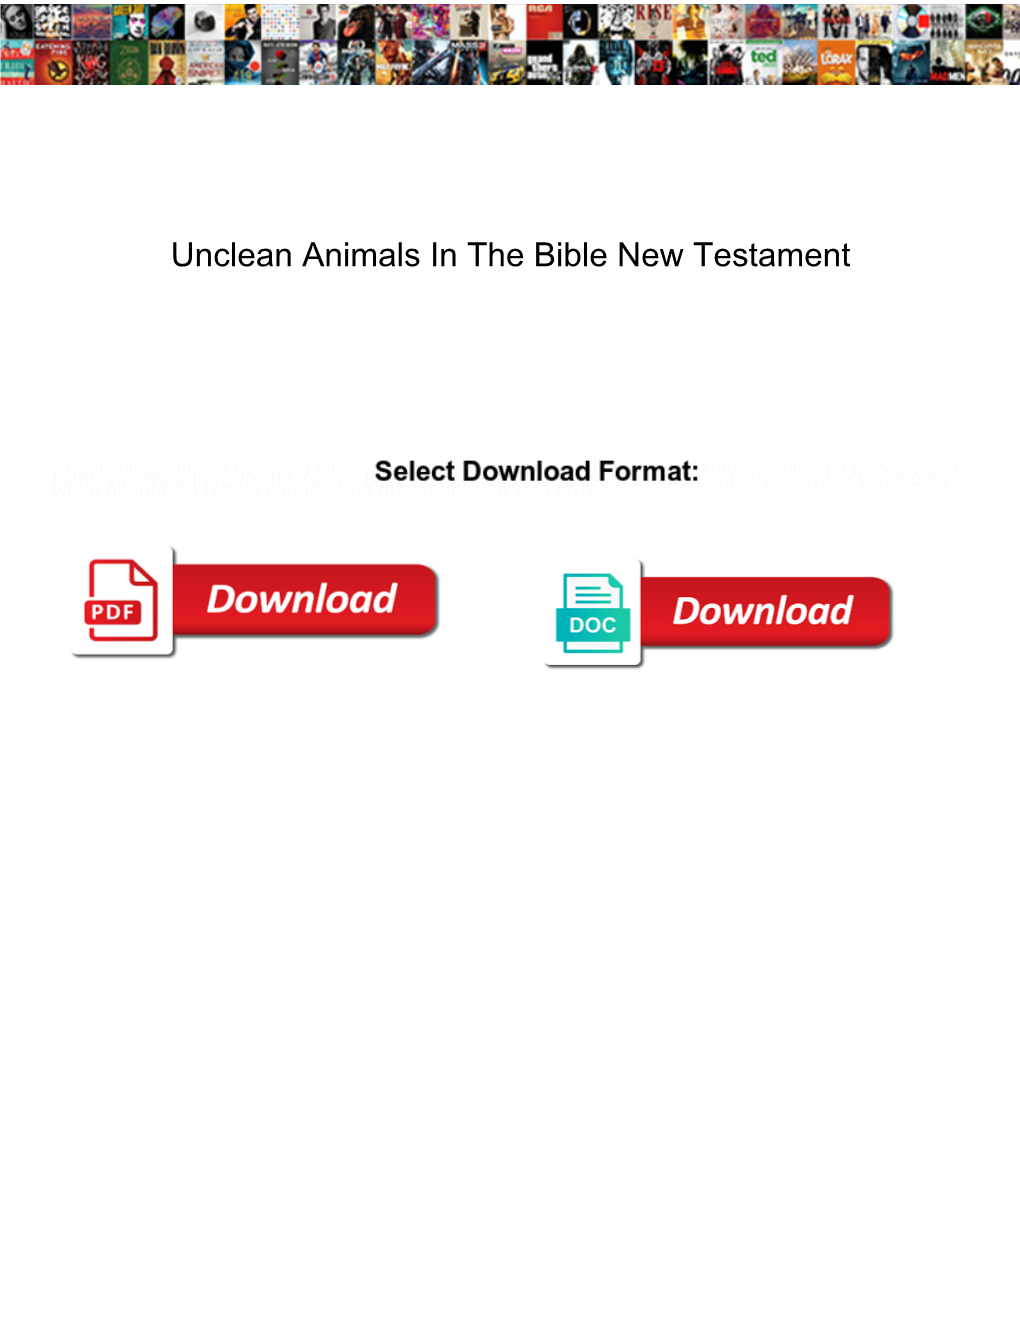 Unclean Animals in the Bible New Testament